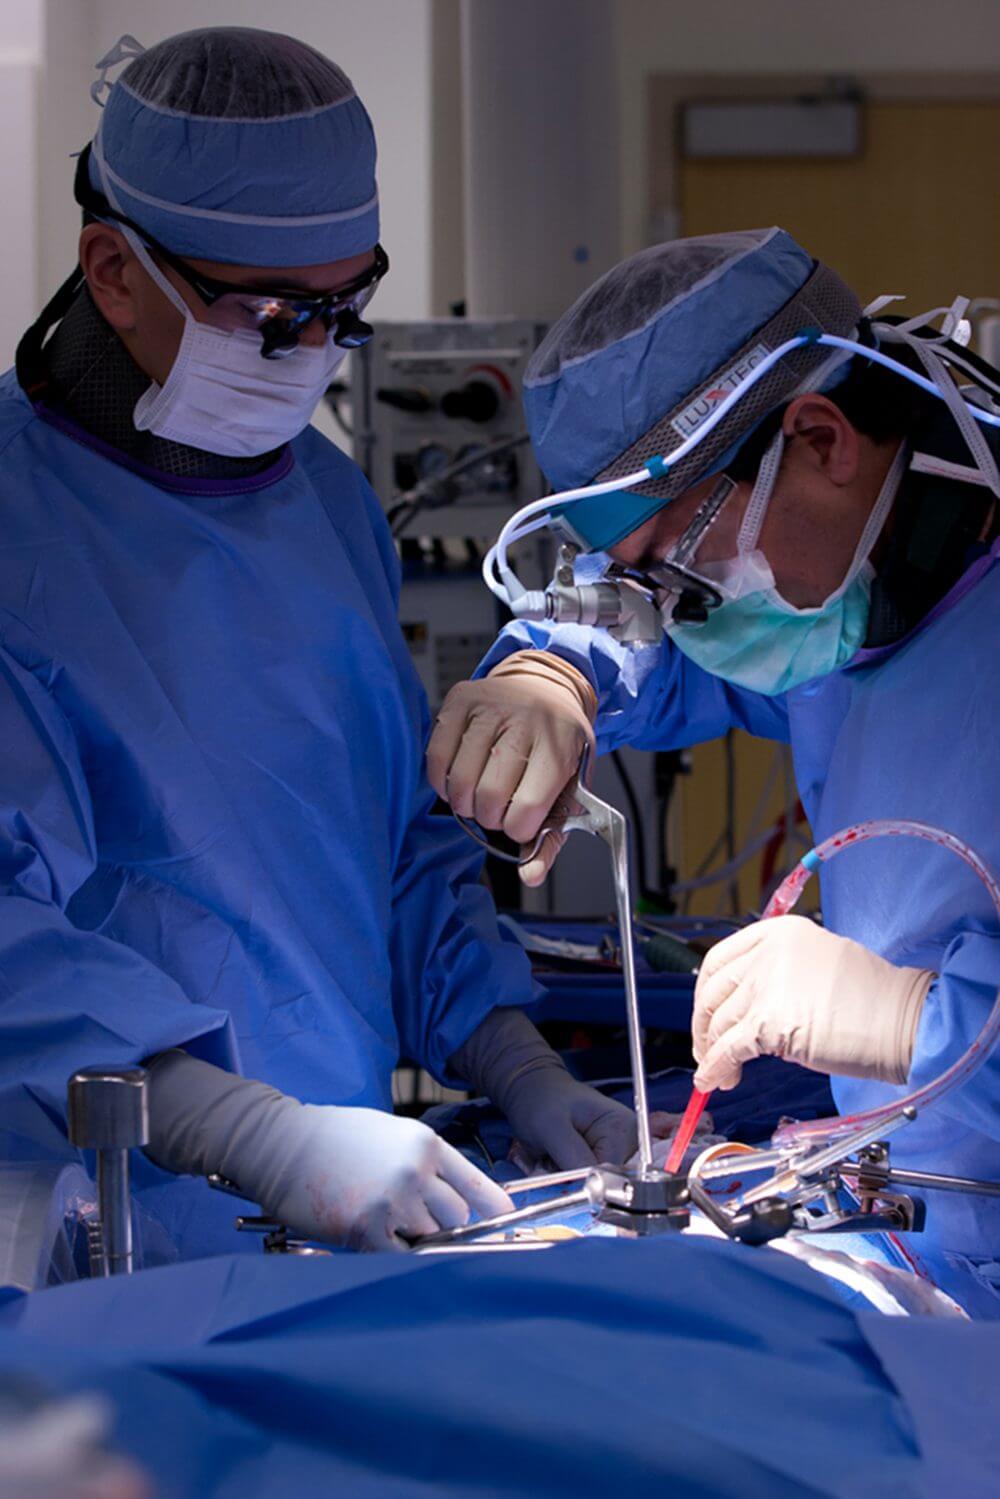 A photo of two doctors performing neurosurgery